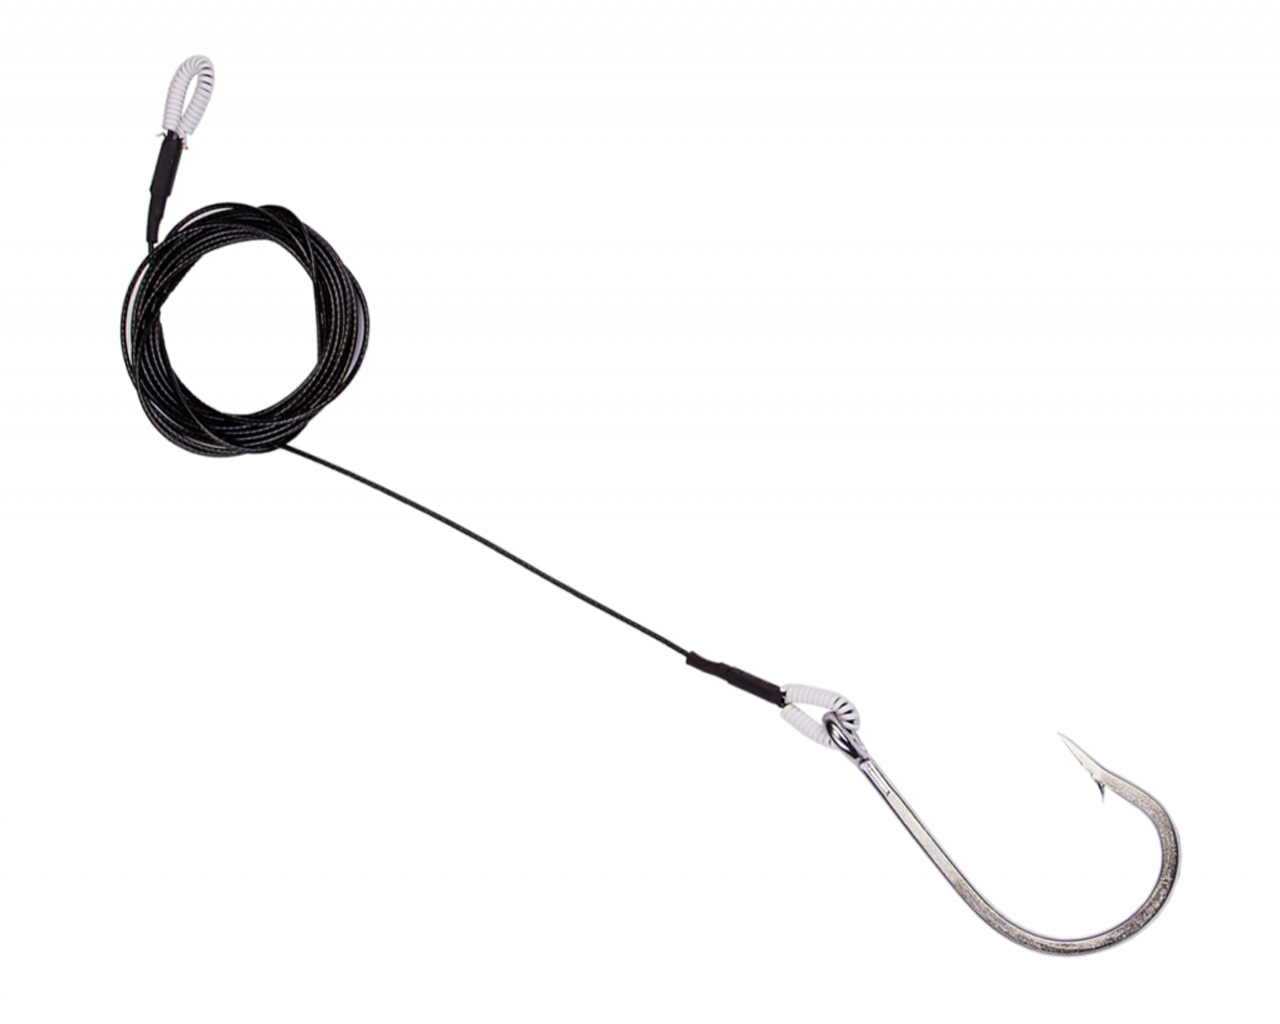 HALCO Terminal Tackle Wire Leader Rig SHARK TRACE